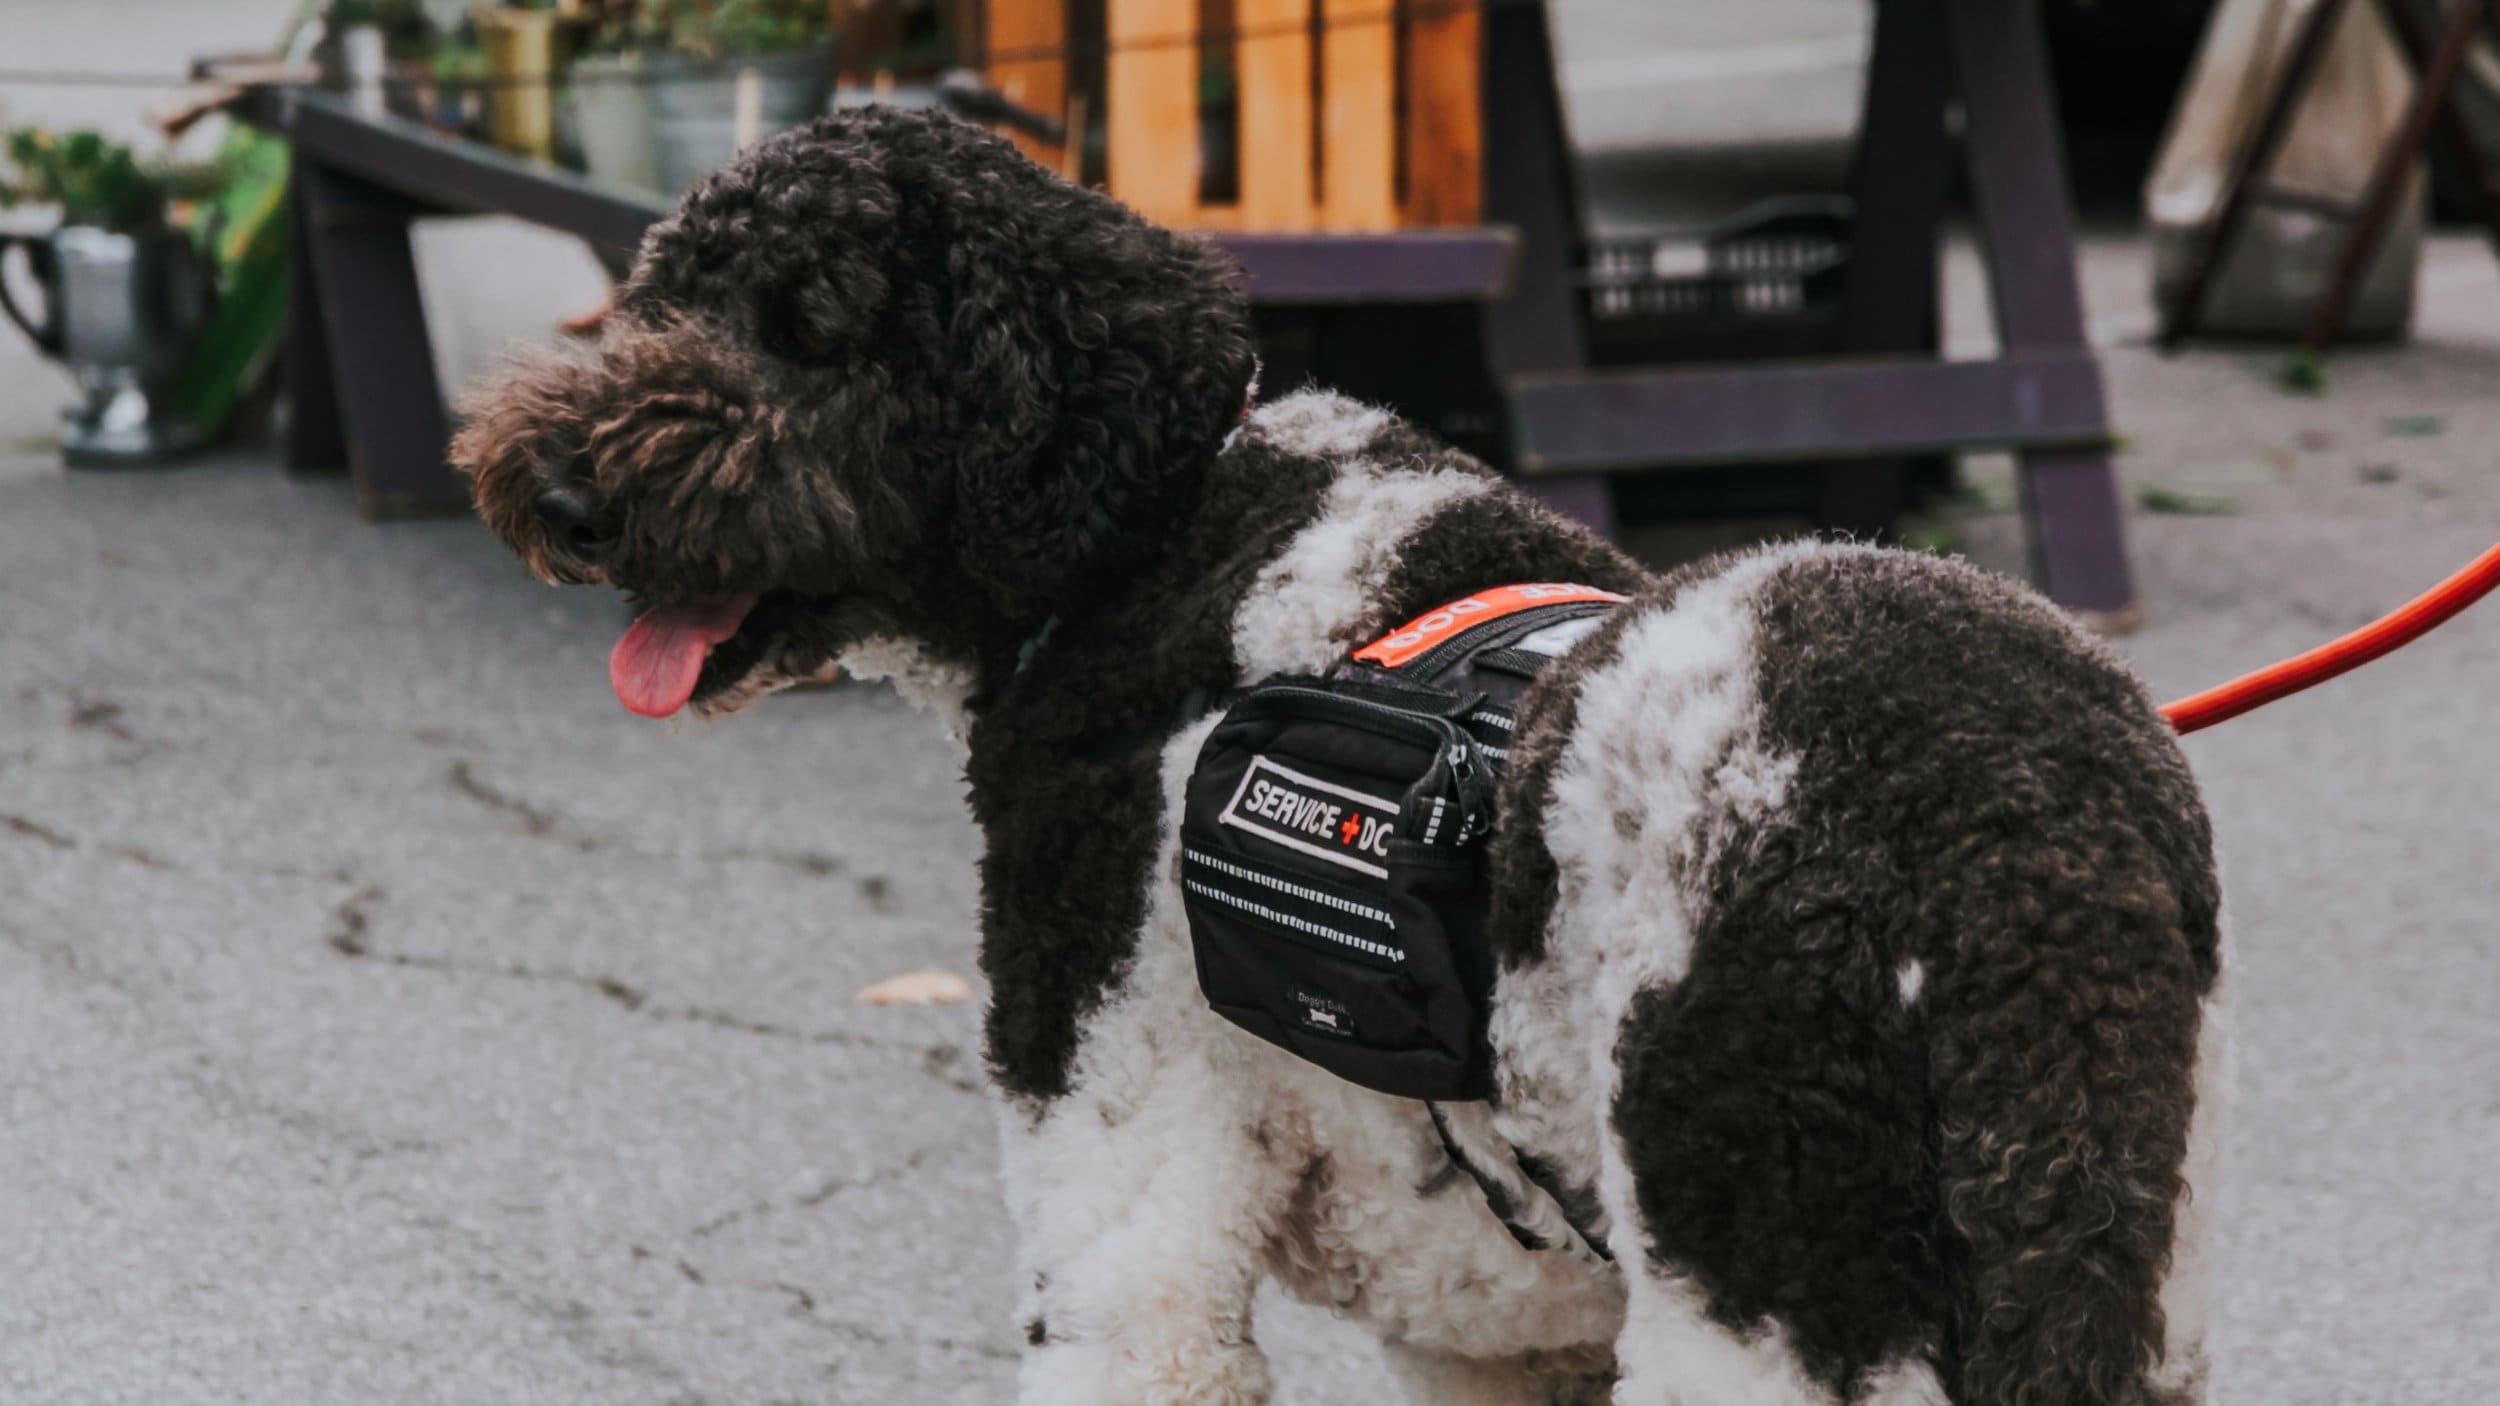 poodle mix wearing backpack that reads "service dog"